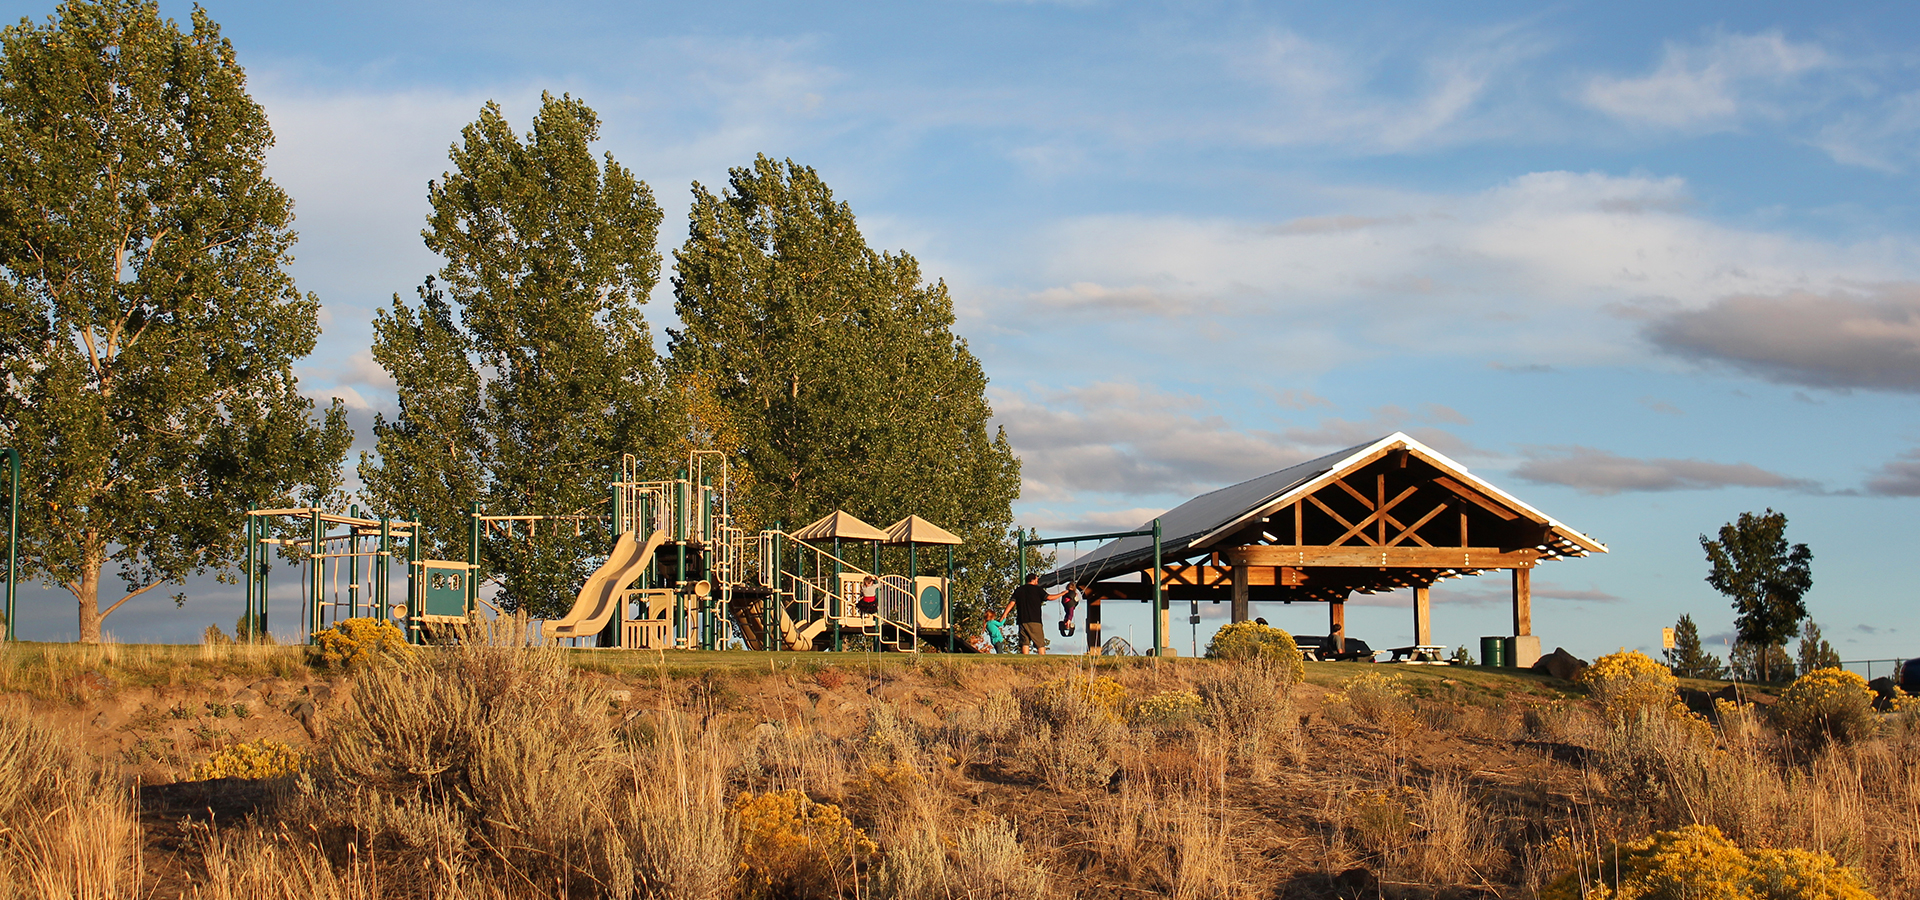 The playground and picnic shelter at Big Sky Park.